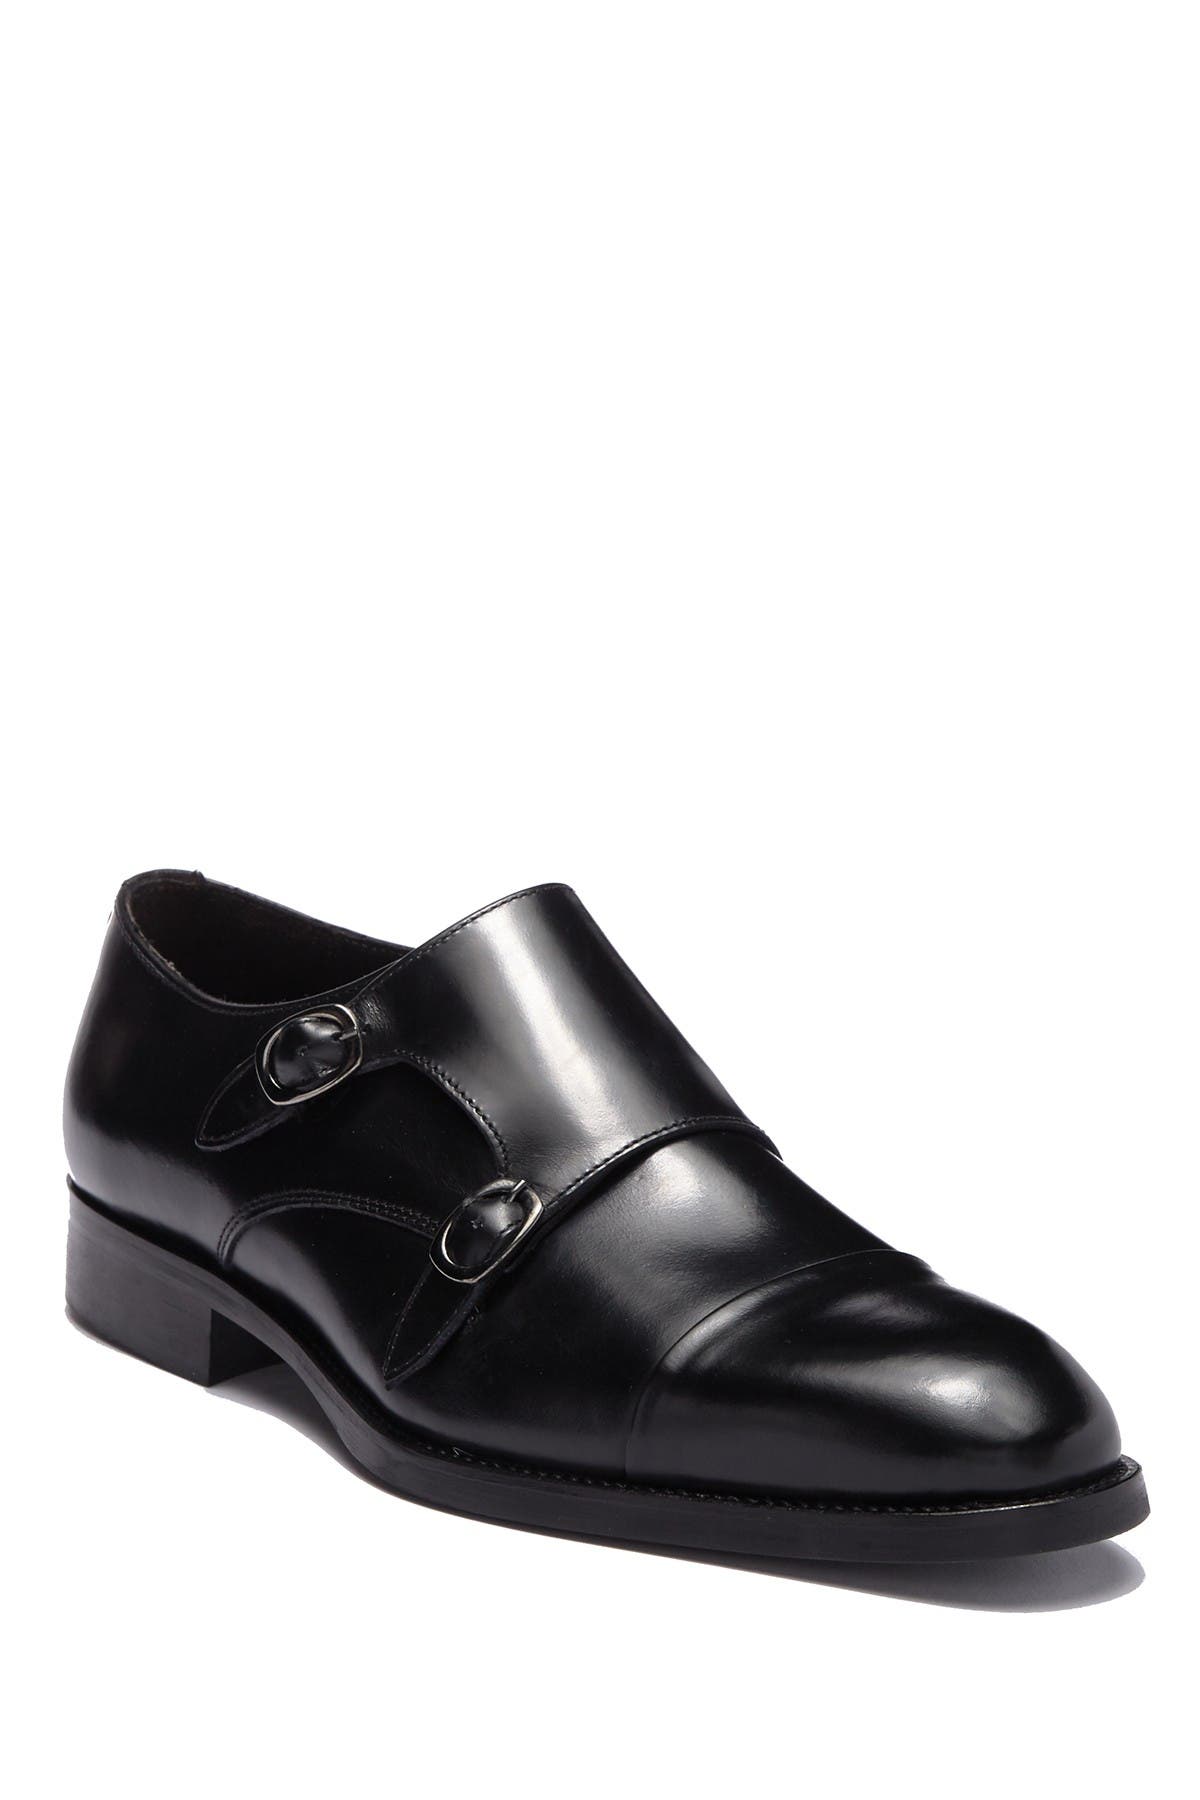 Barata Leather Double Monk Strap Loafer 